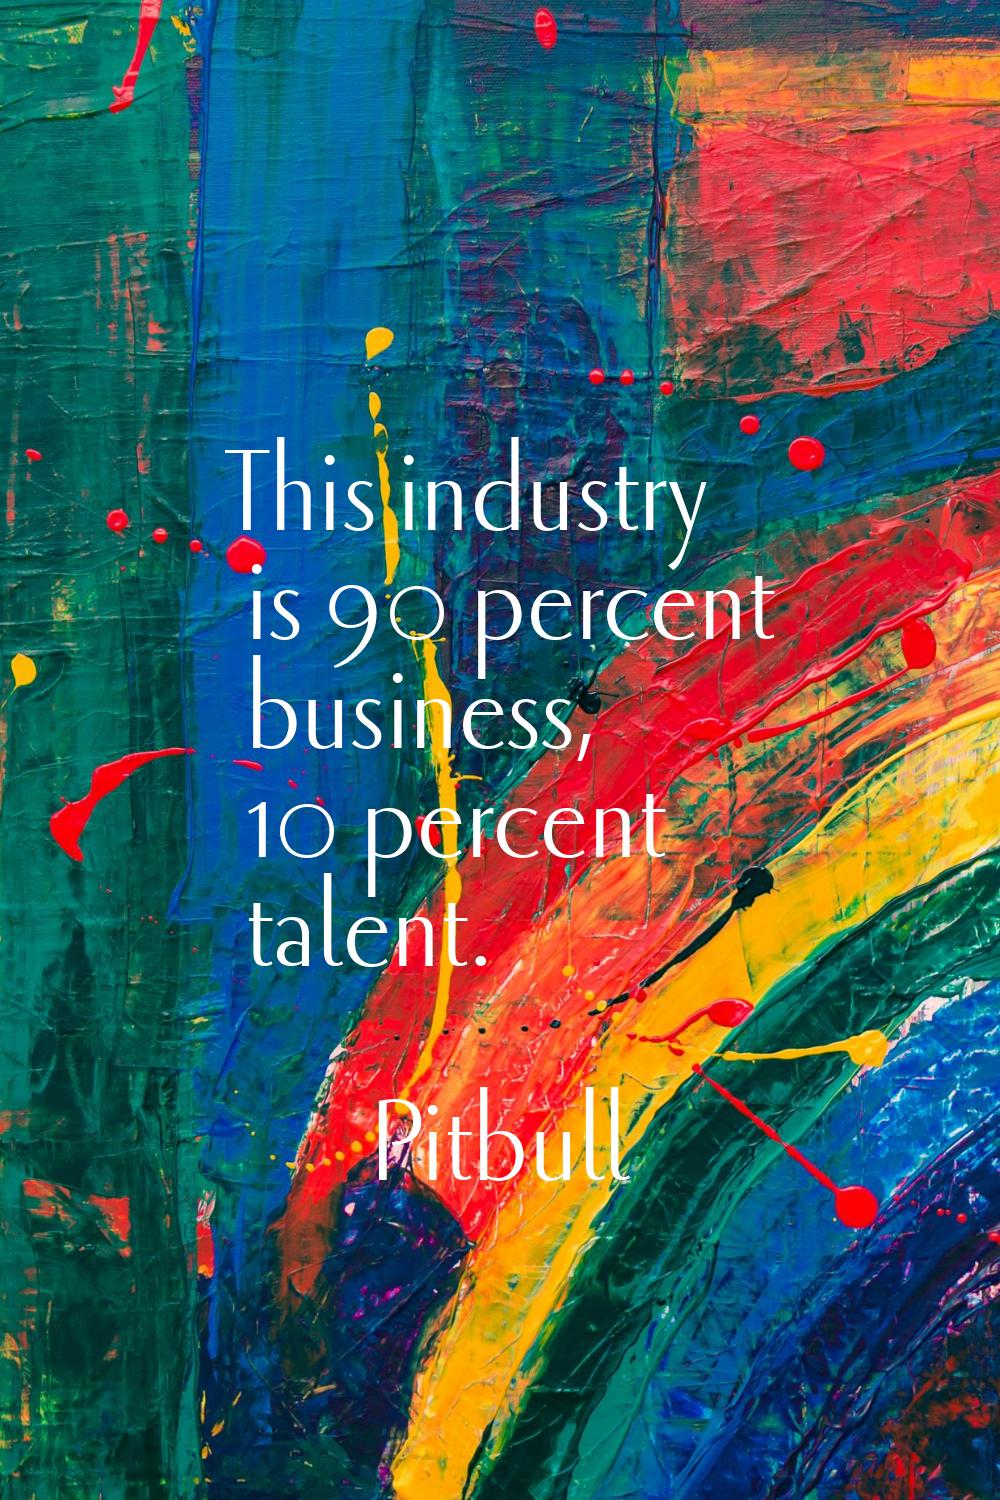 This industry is 90 percent business, 10 percent talent.